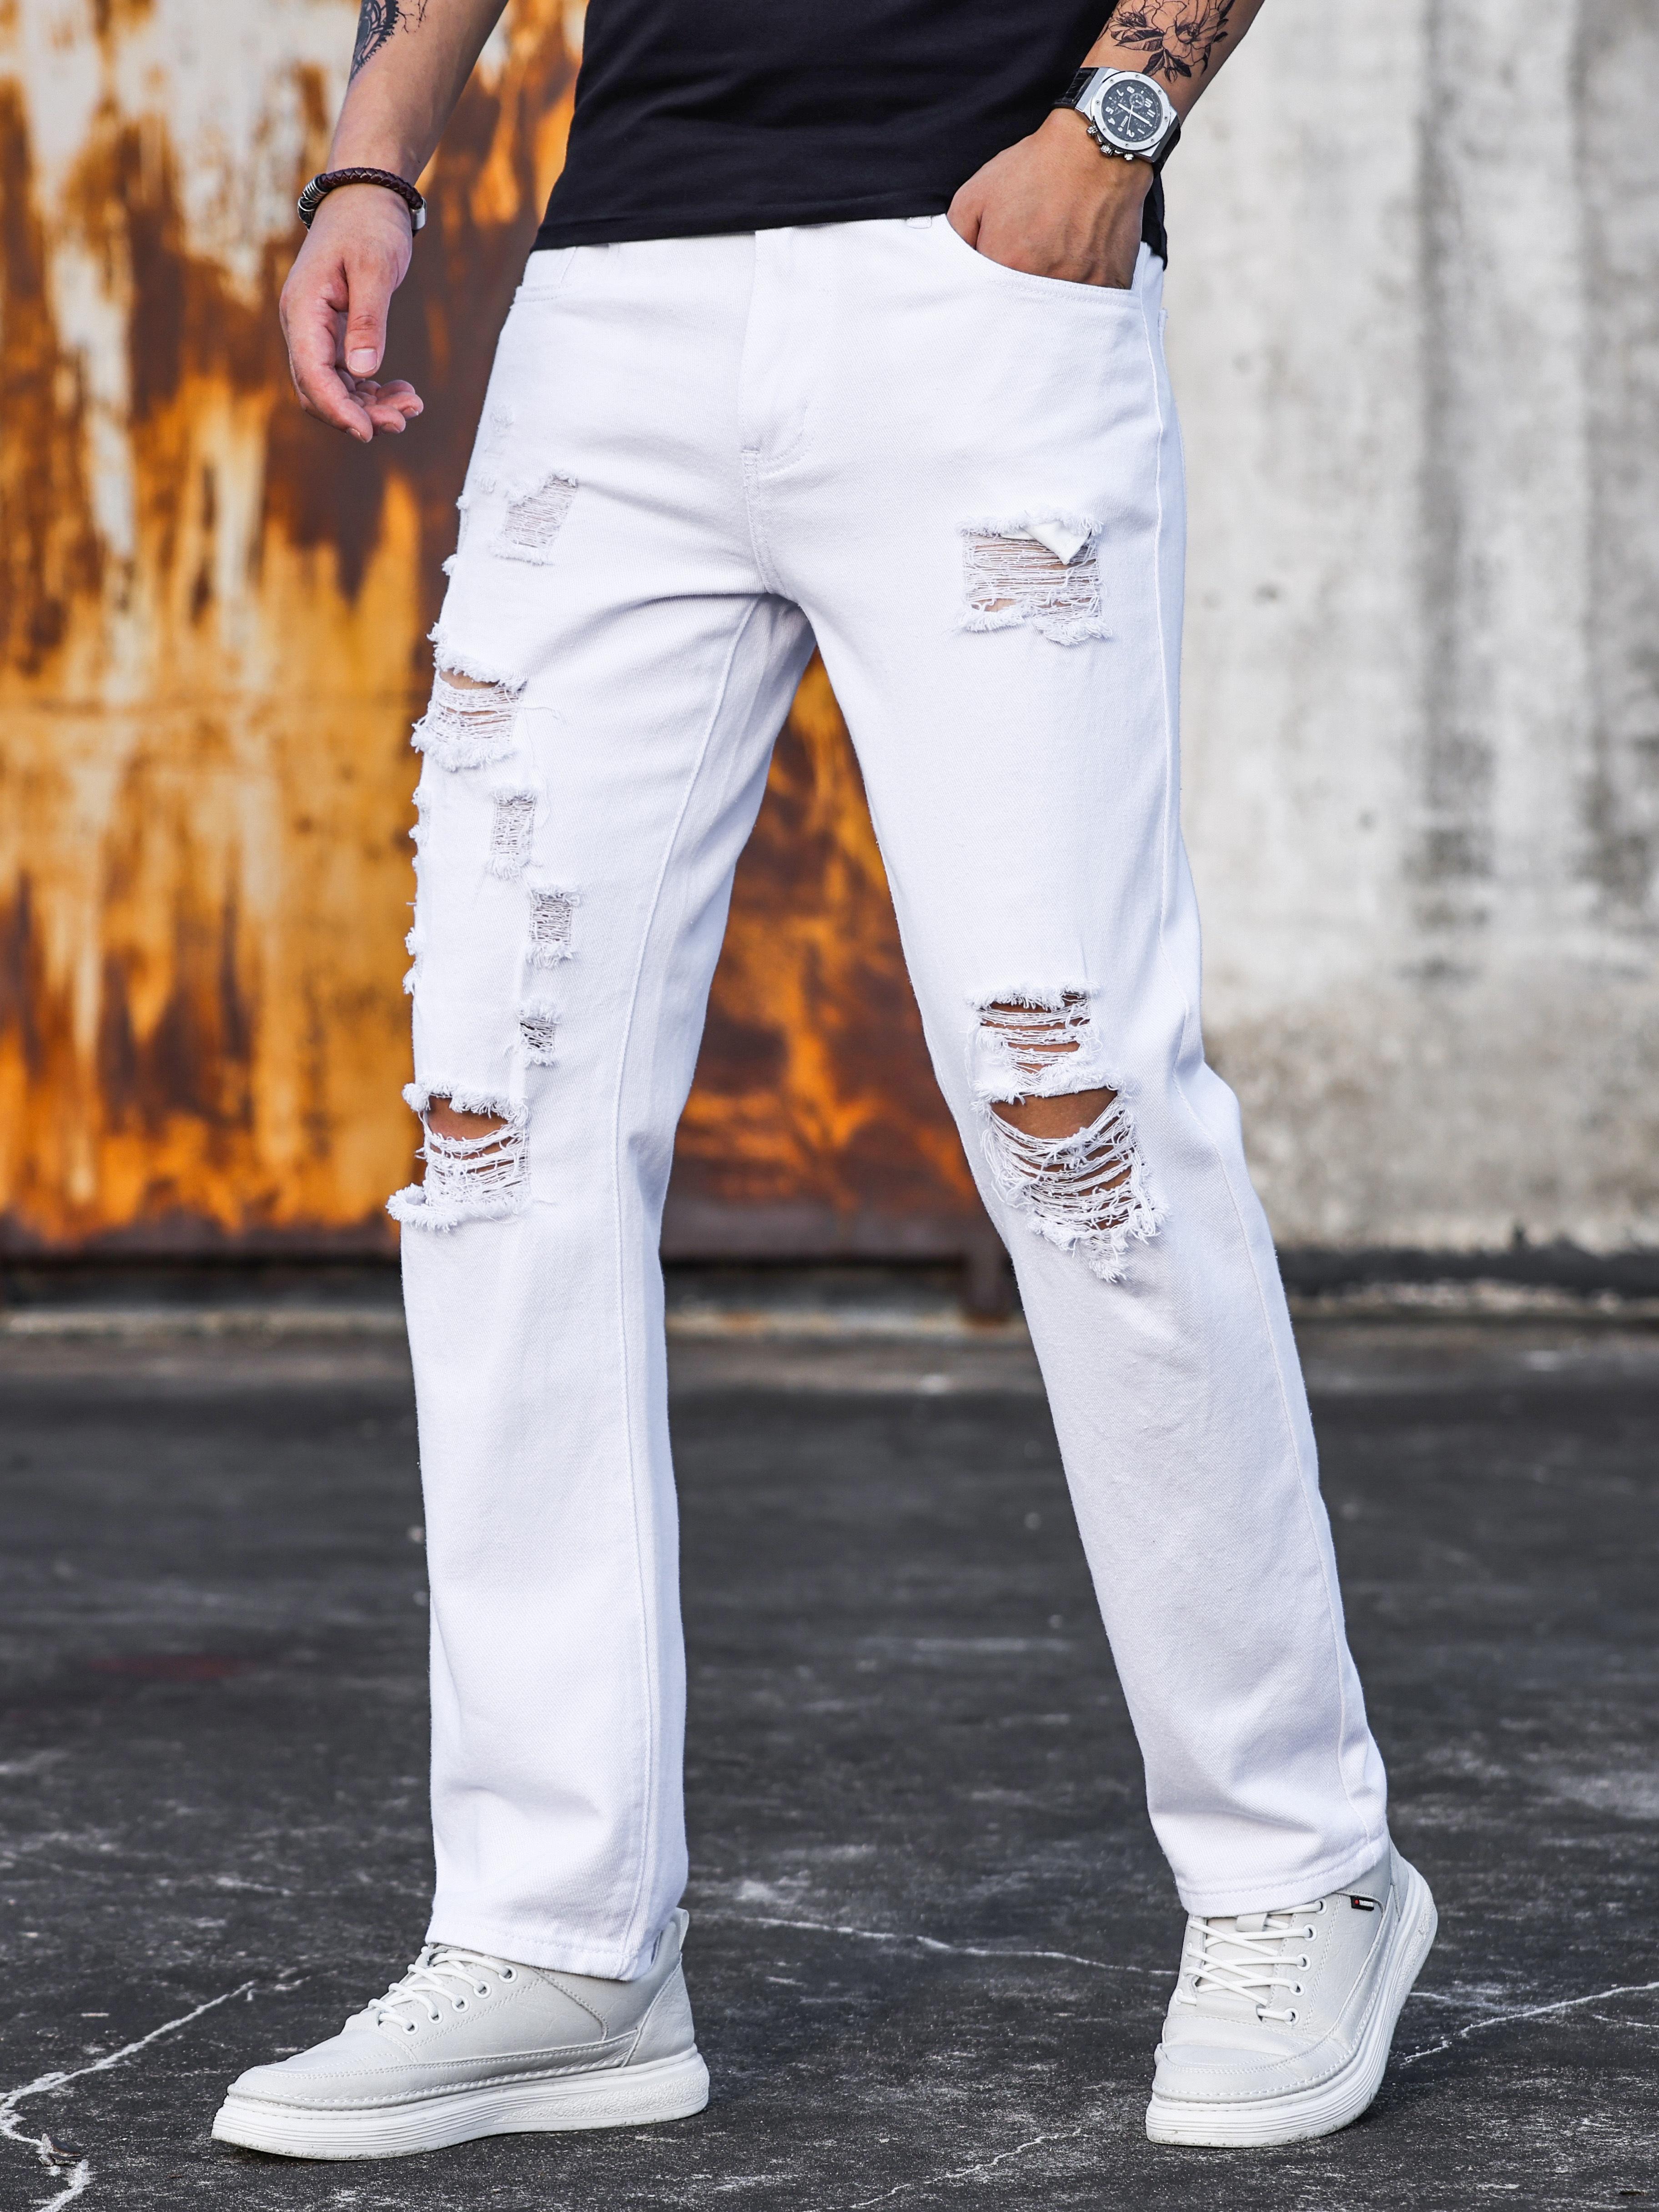 Mens Trousers Bottoms Slim Fit Distressed Frayed Ripped Jeans Denim Pants  Skinny